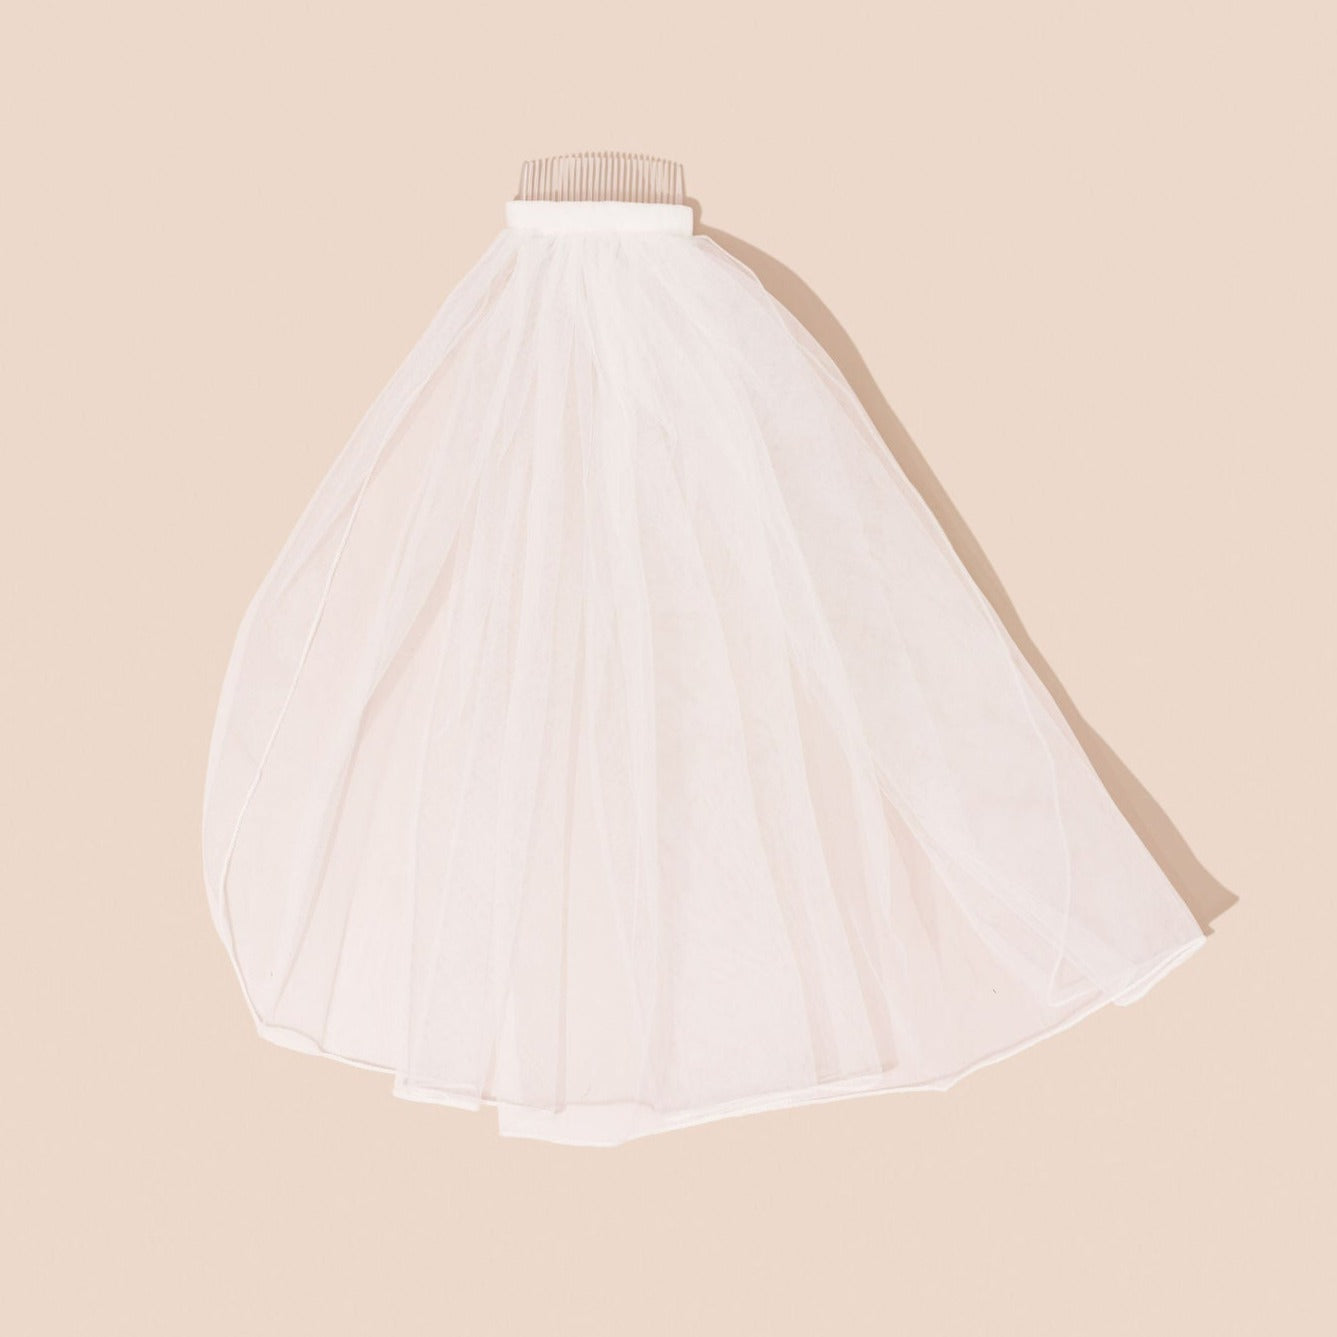 One layer, bunched tulle veil with pencil edge trim (60cm)